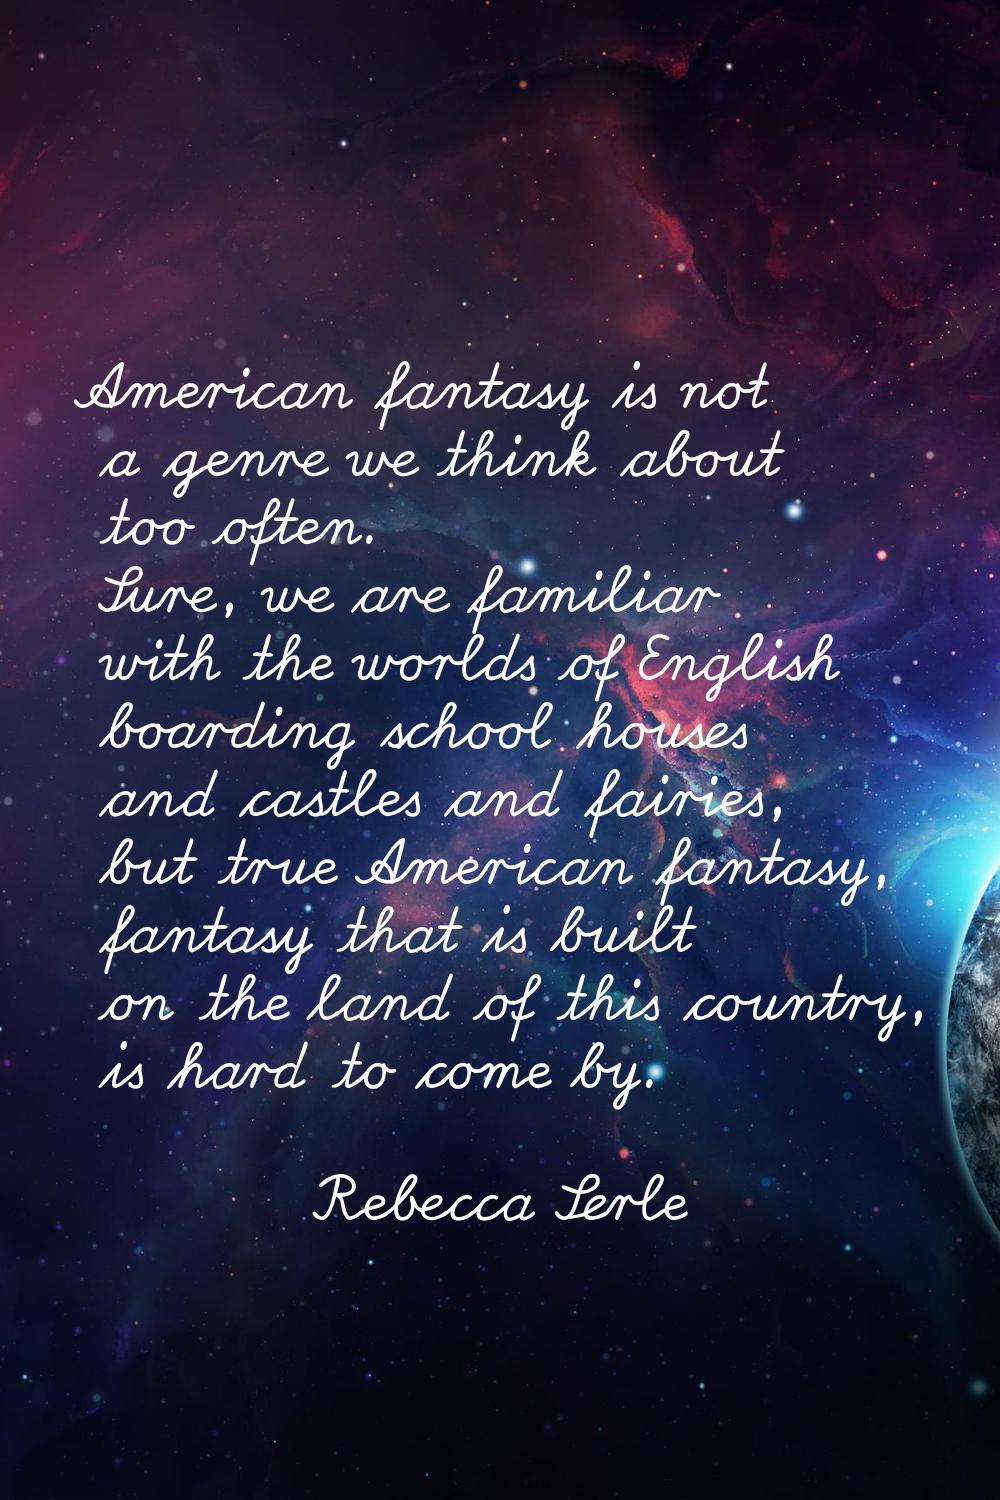 American fantasy is not a genre we think about too often. Sure, we are familiar with the worlds of 